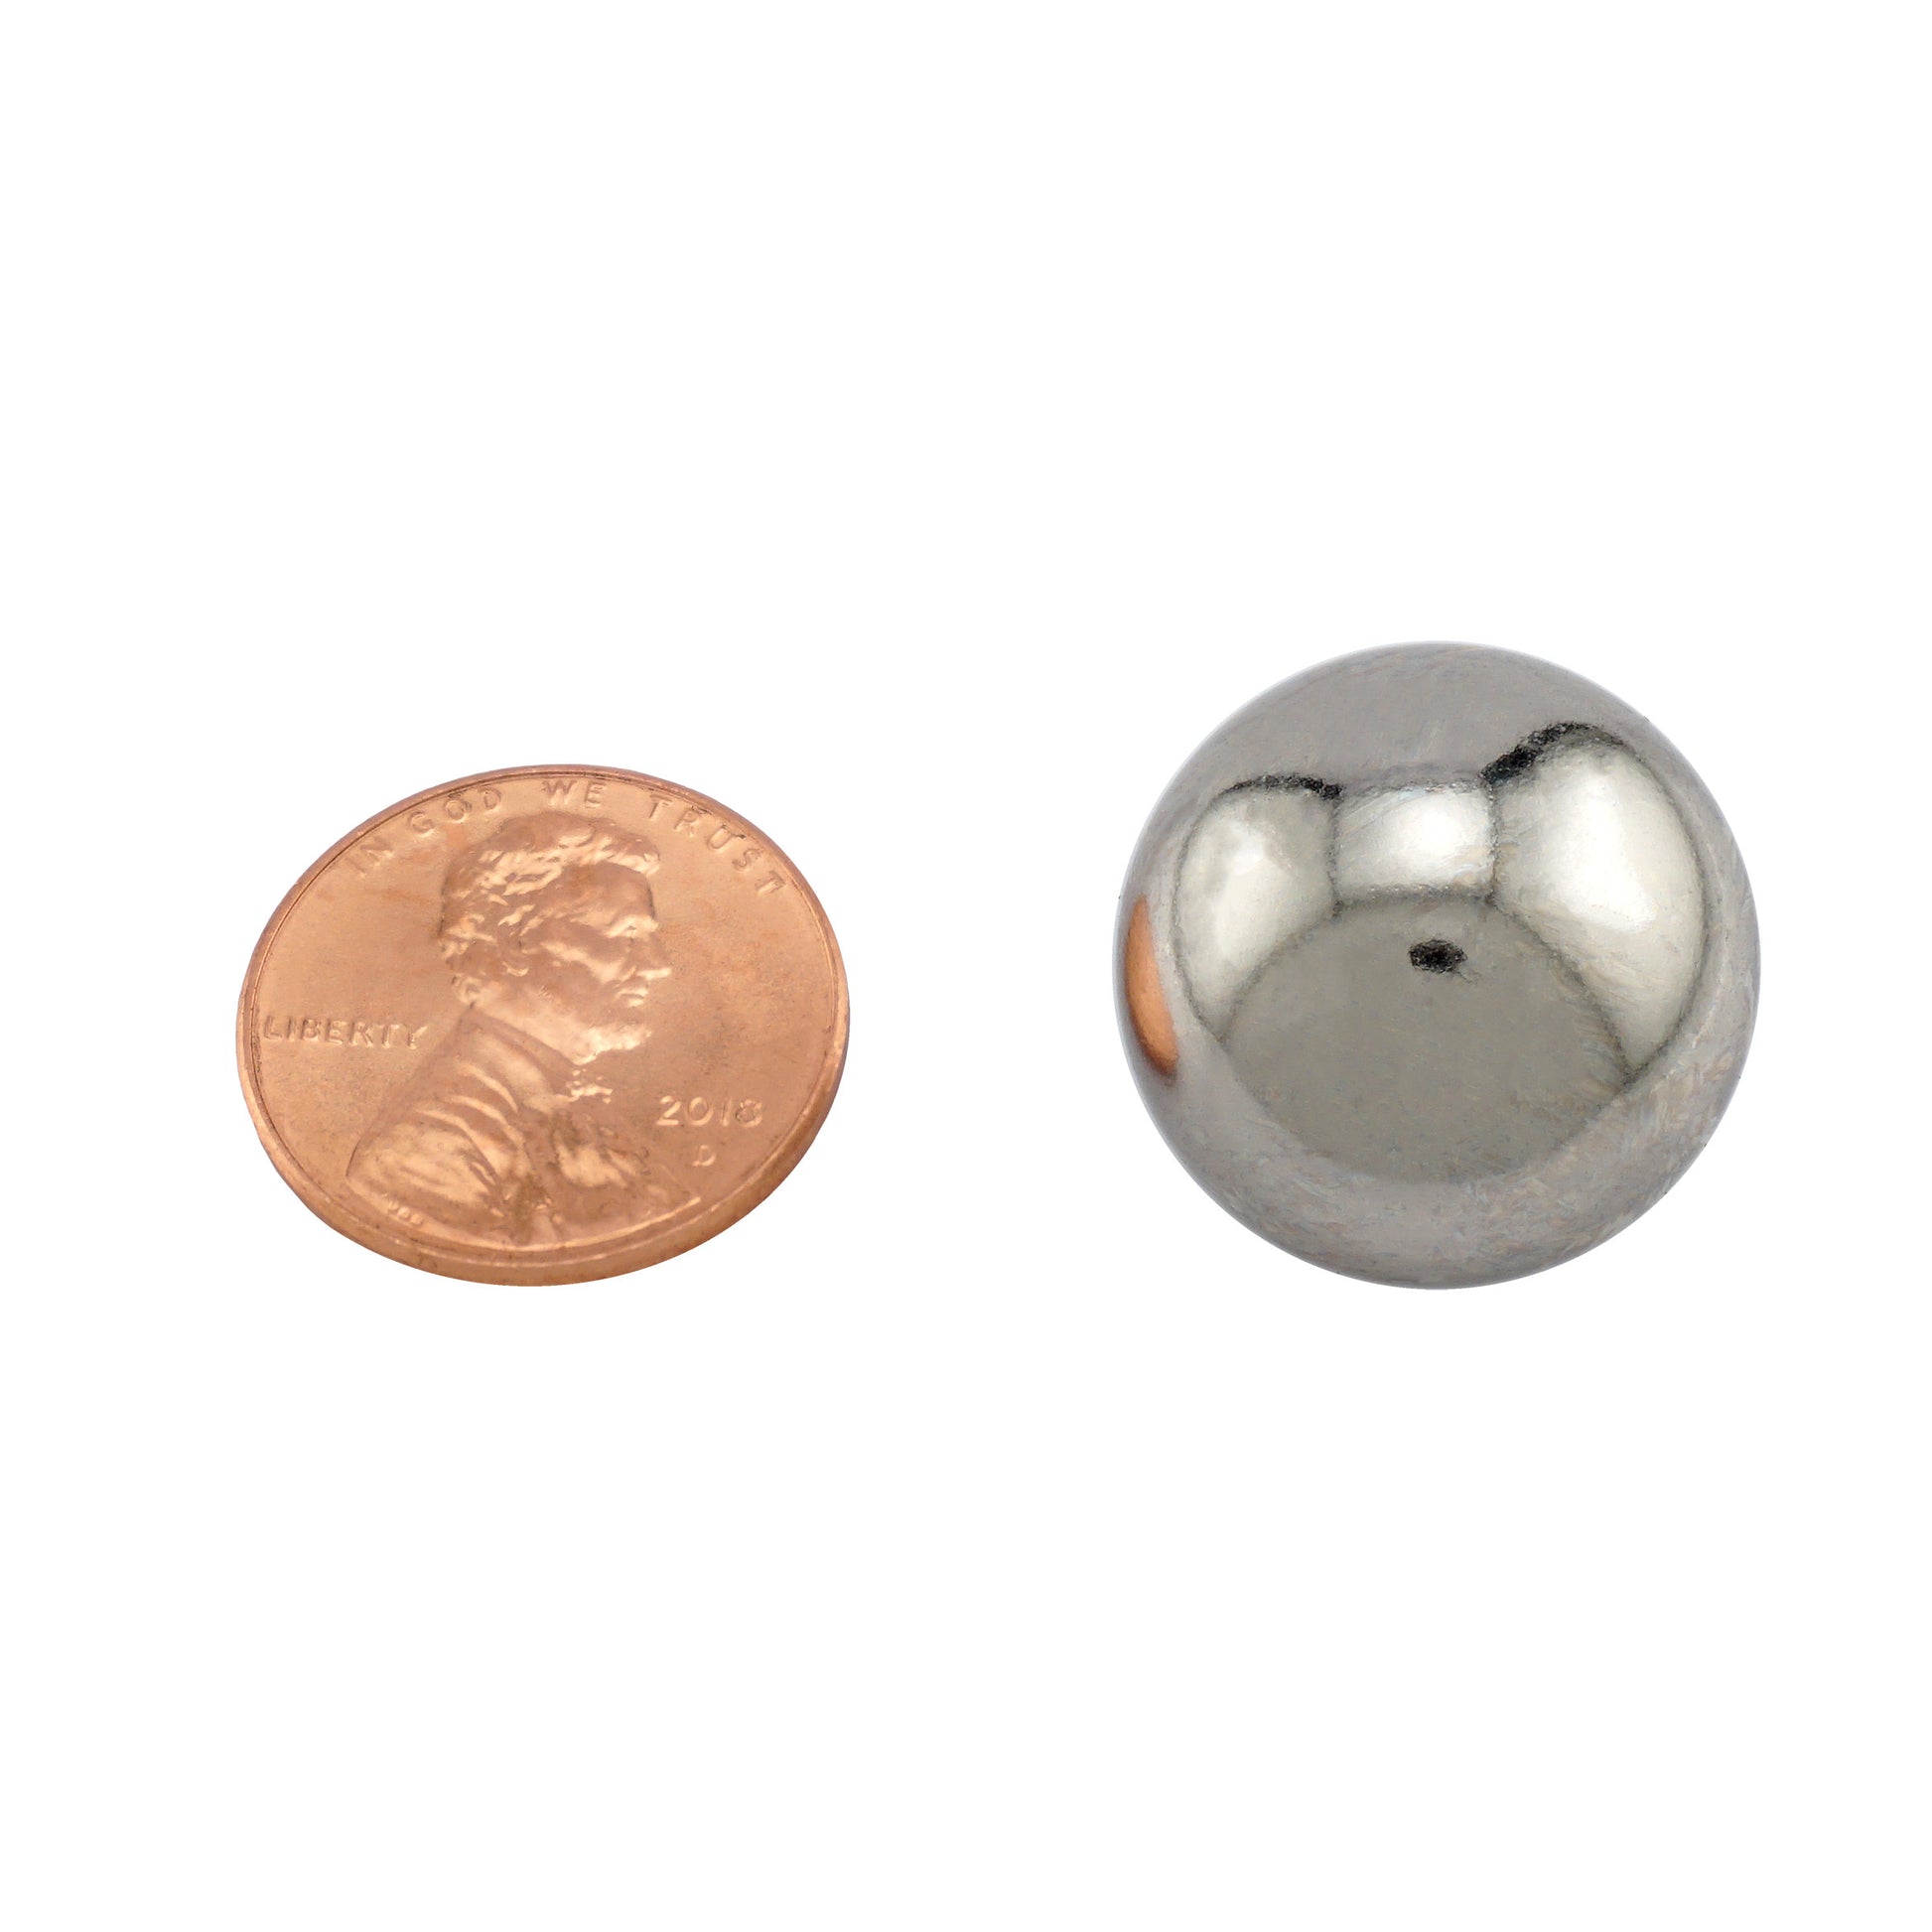 Load image into Gallery viewer, 5XNS75 Neodymium Sphere Magnet - Compared to Penny for Size Reference